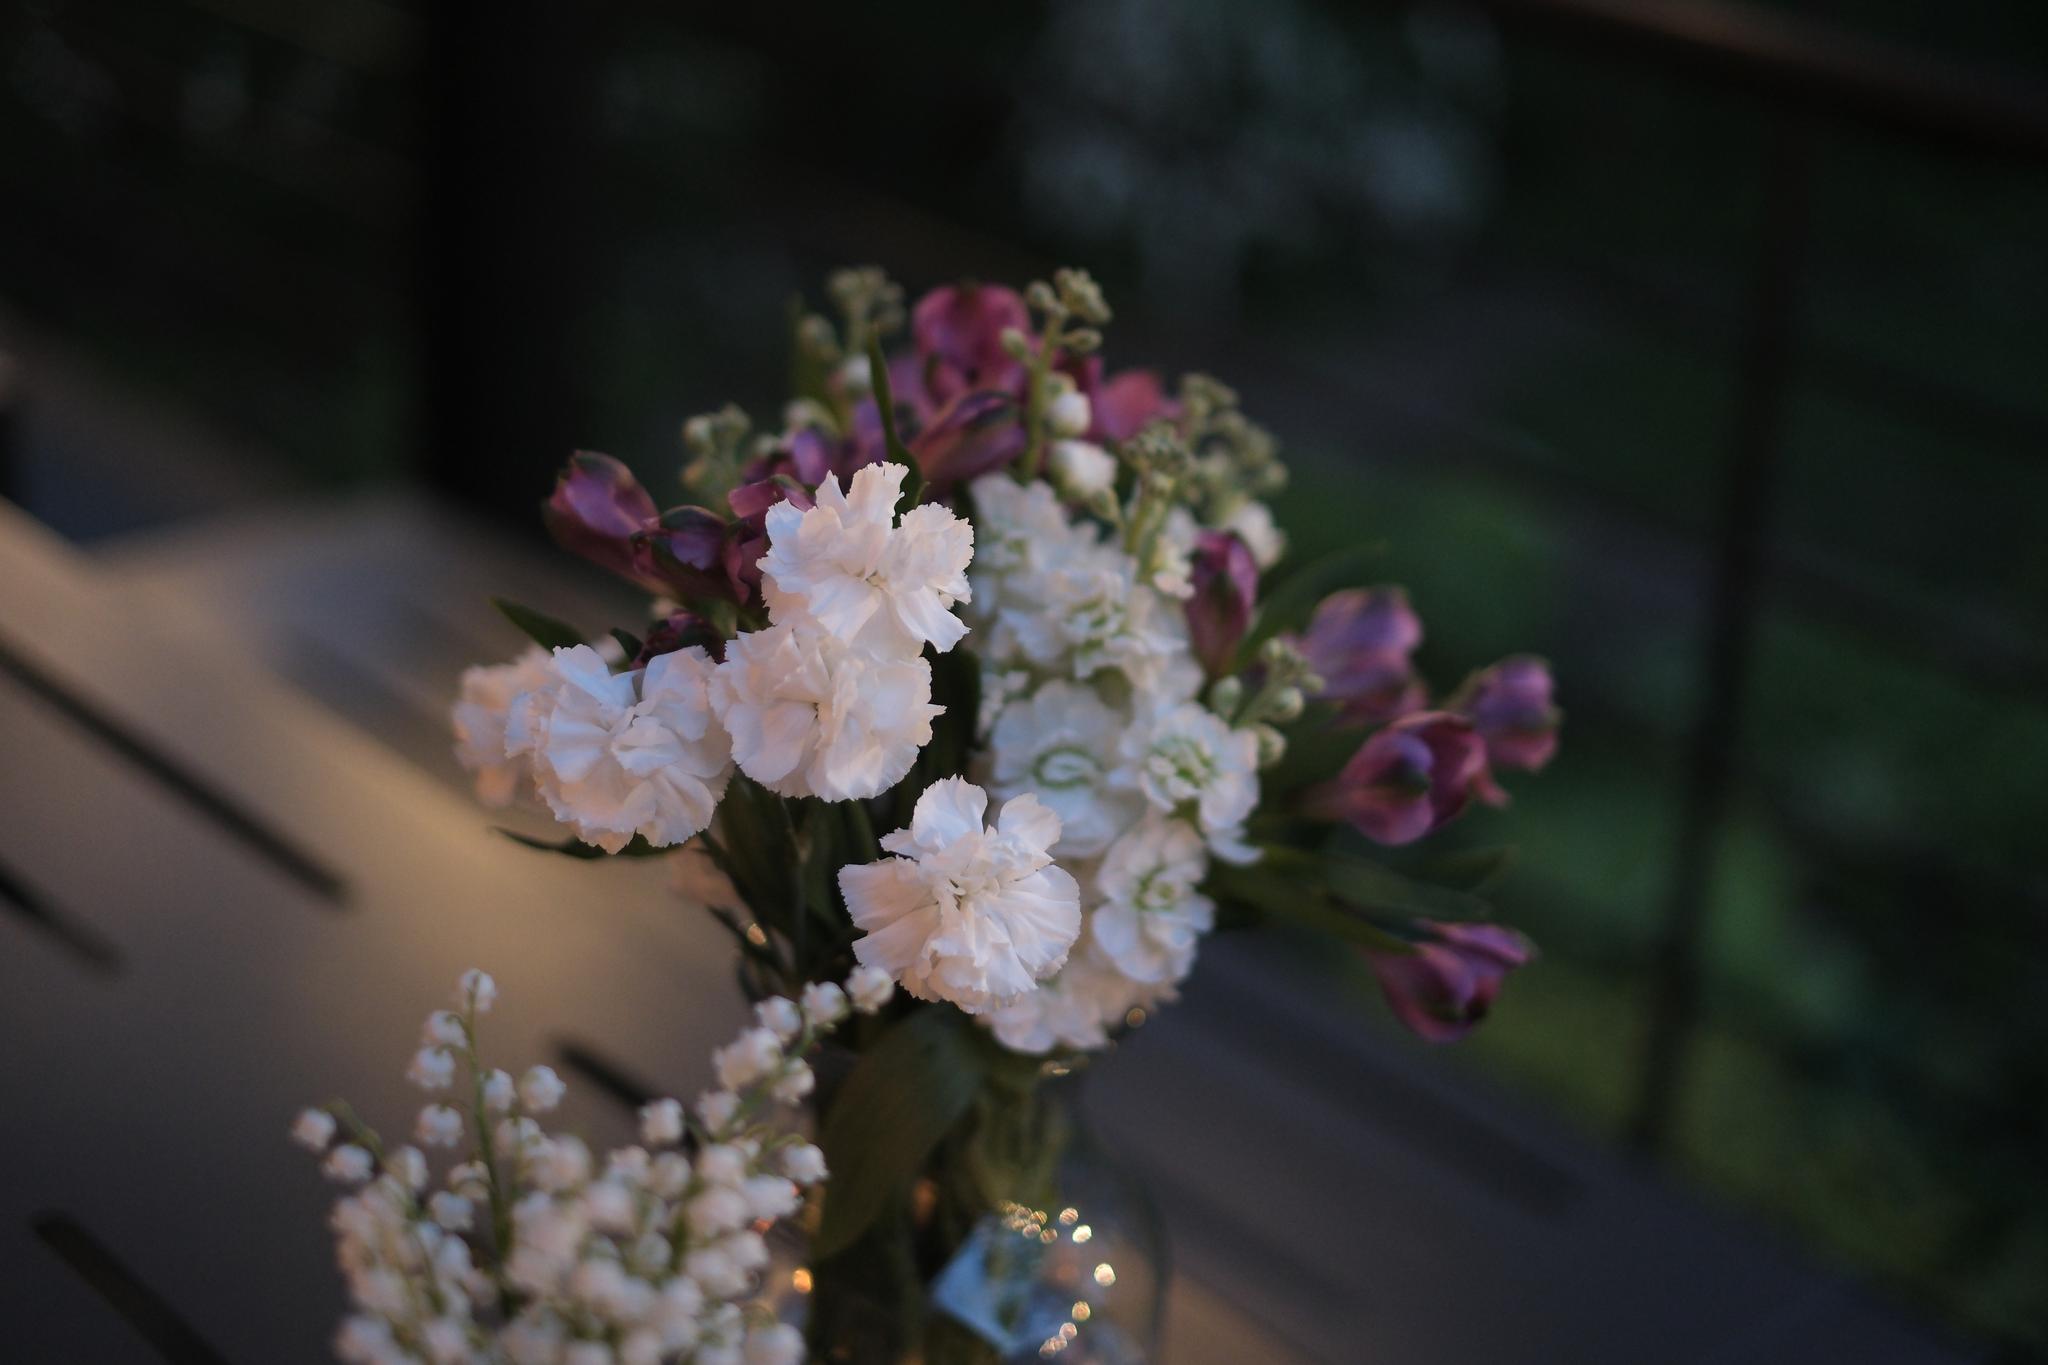 A bouquet of flowers with a mix of white and purple blooms in a glass vase, set on a table with a blurred background suggesting an outdoor setting